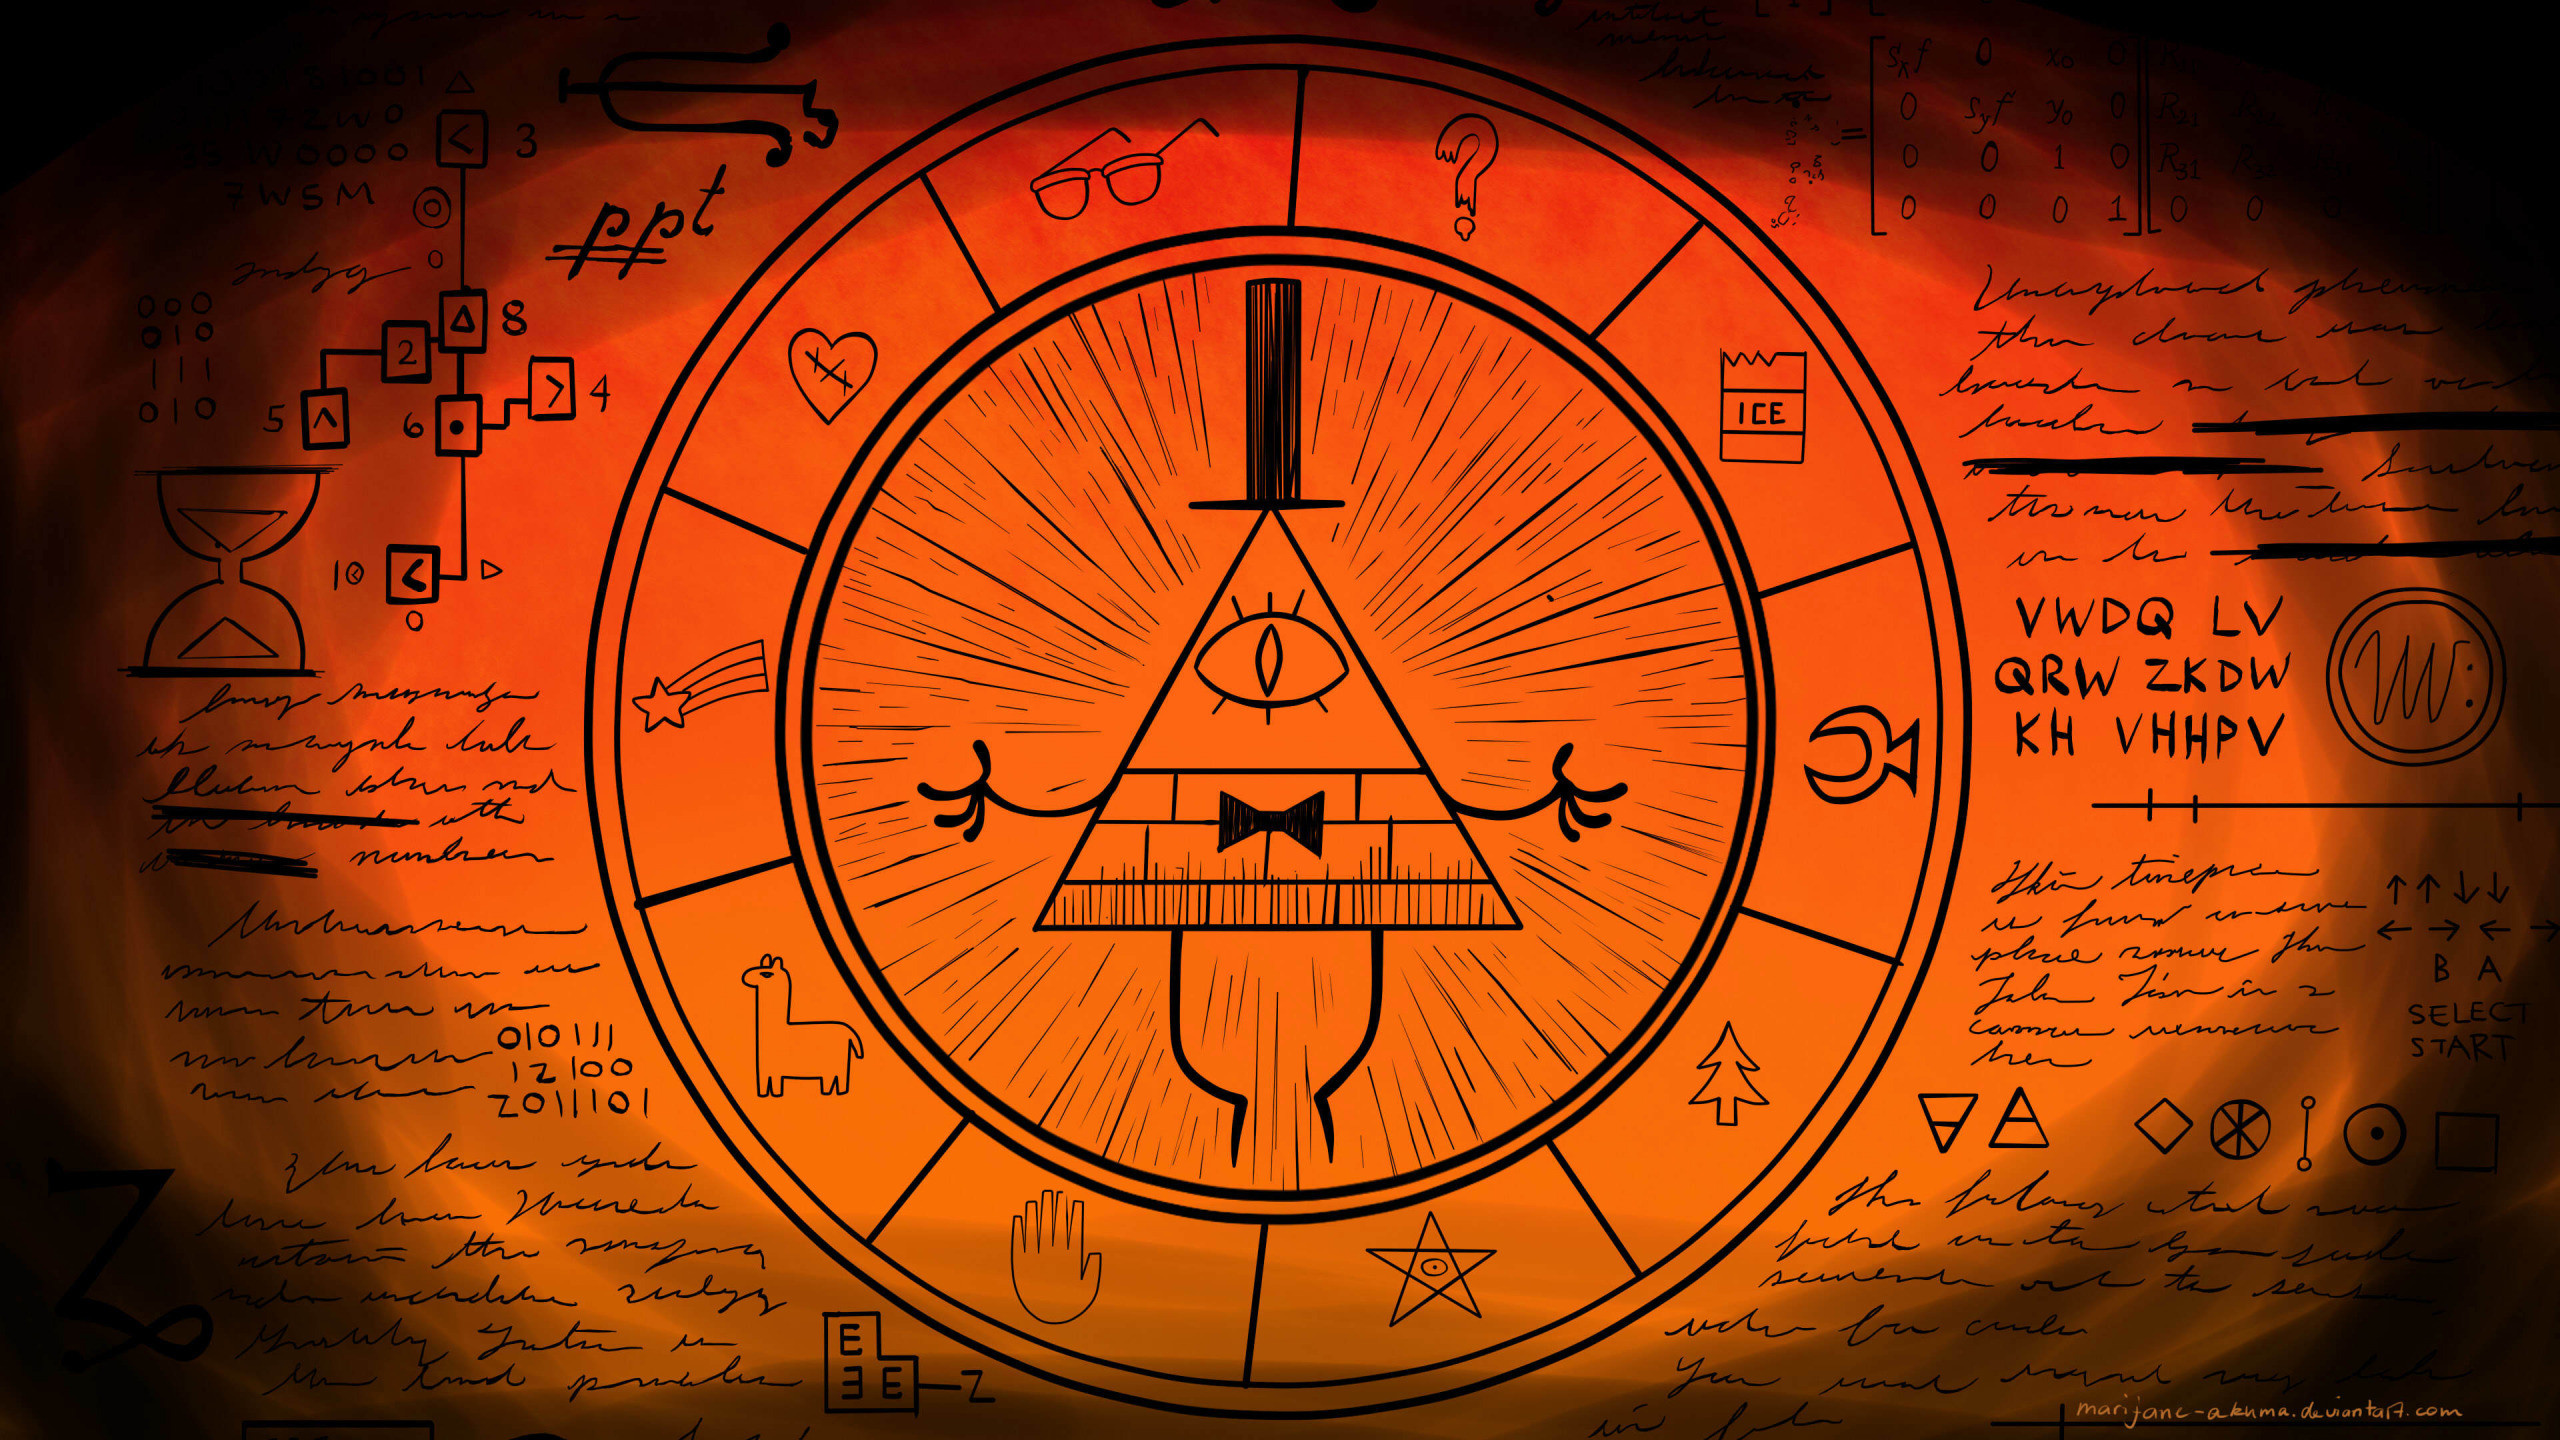 Bill Cipher Minimalist Wallpaper posted by Ethan Johnson 2560x1440